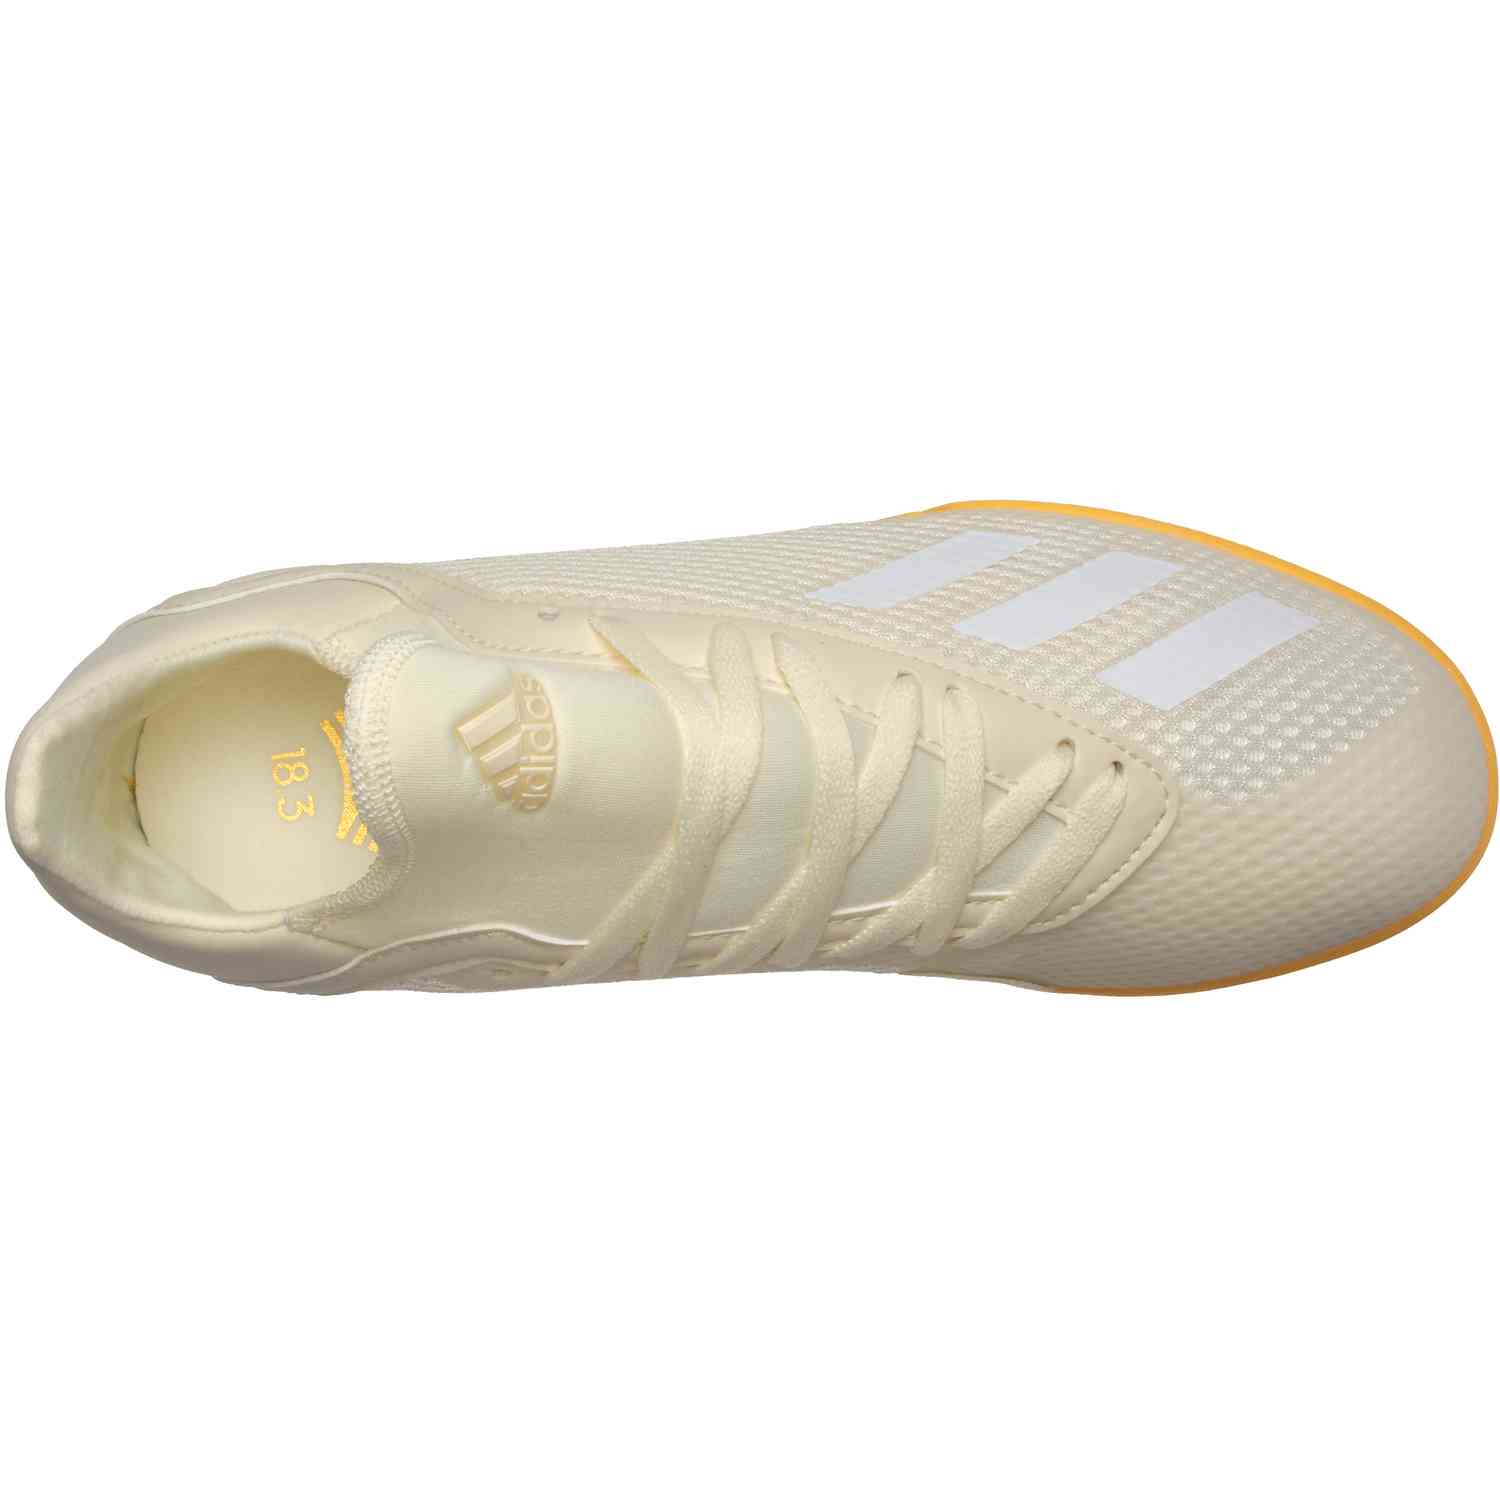 Build on Onlooker Publication adidas X Tango 18.3 IN - Youth - Off White/White/Black - SoccerPro